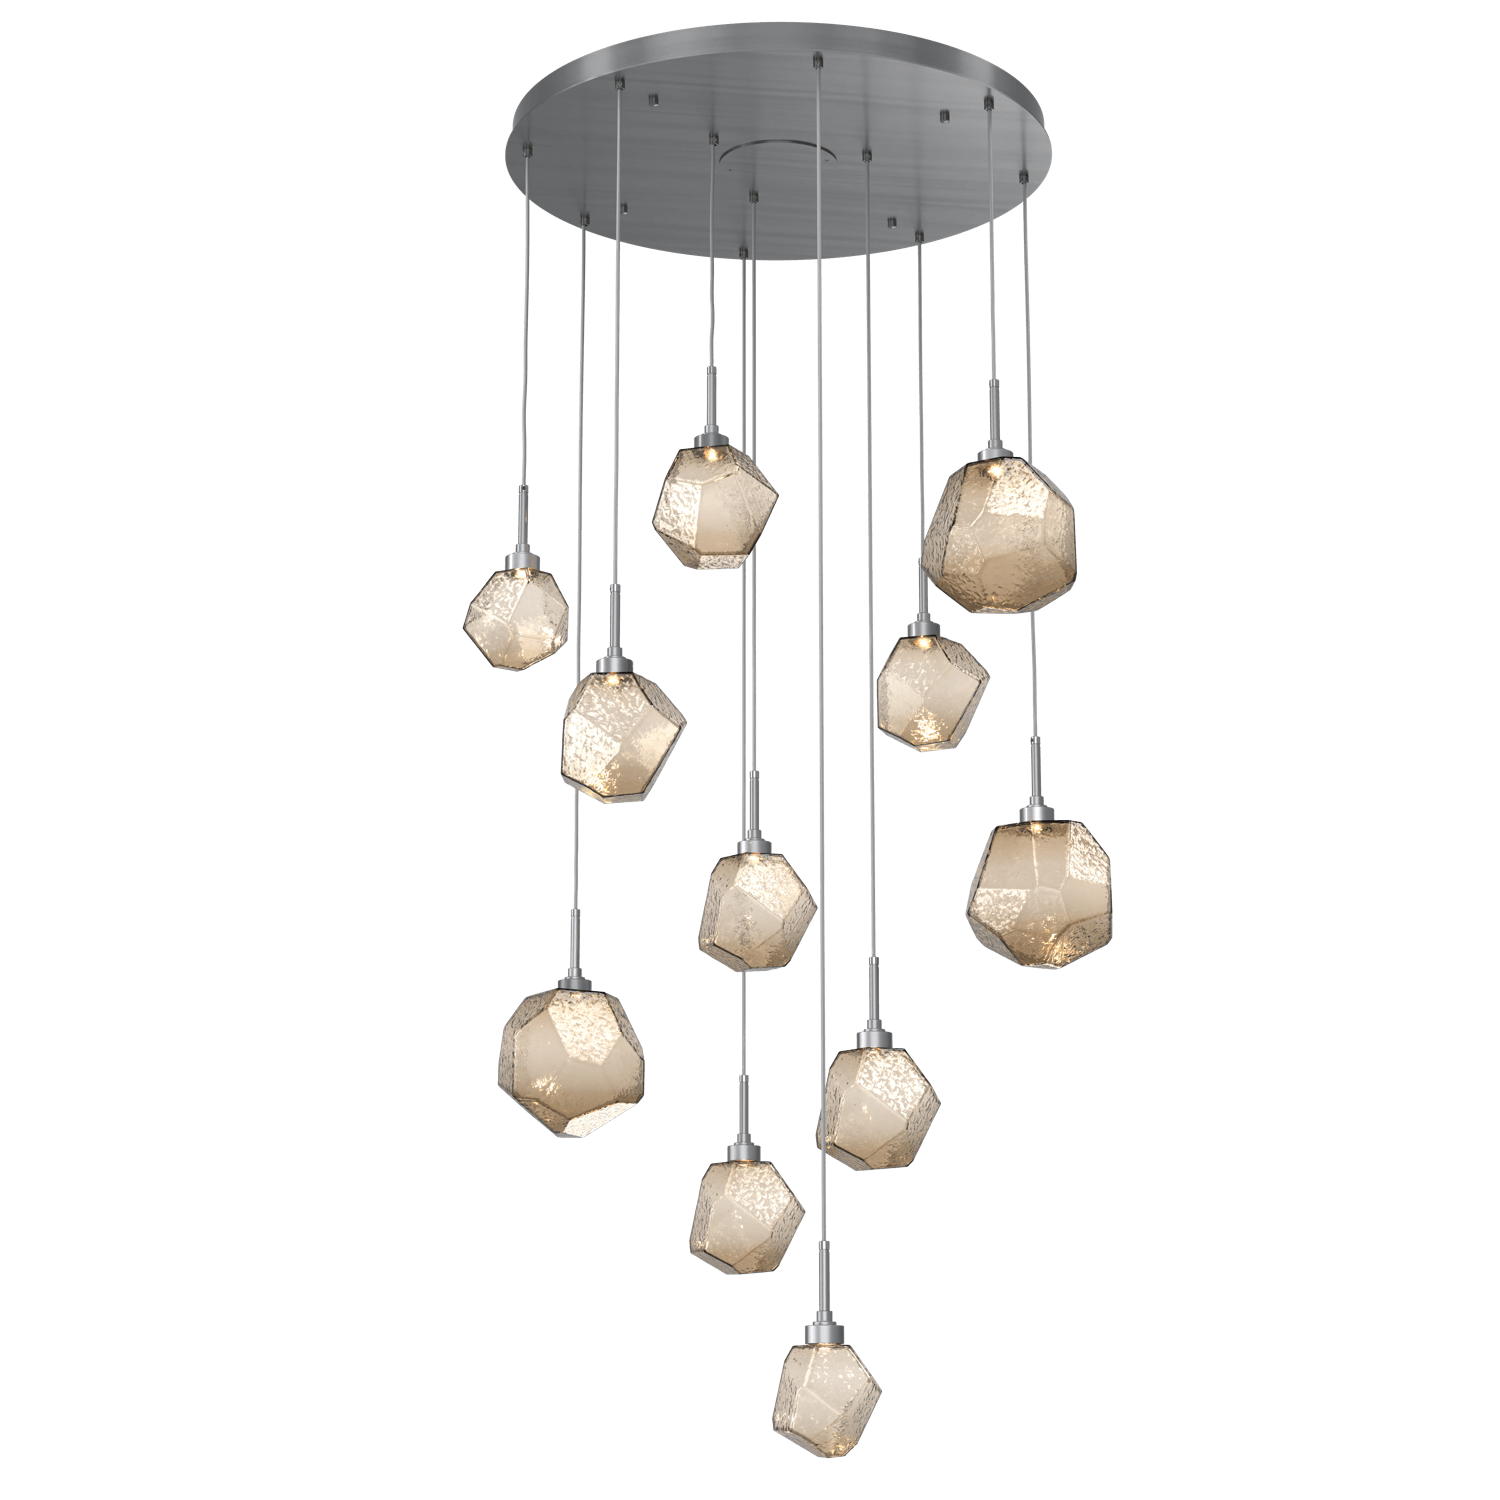 CHB0039-11-GM-B-Hammerton-Studio-Gem-11-light-round-pendant-chandelier-with-gunmetal-finish-and-bronze-blown-glass-shades-and-LED-lamping